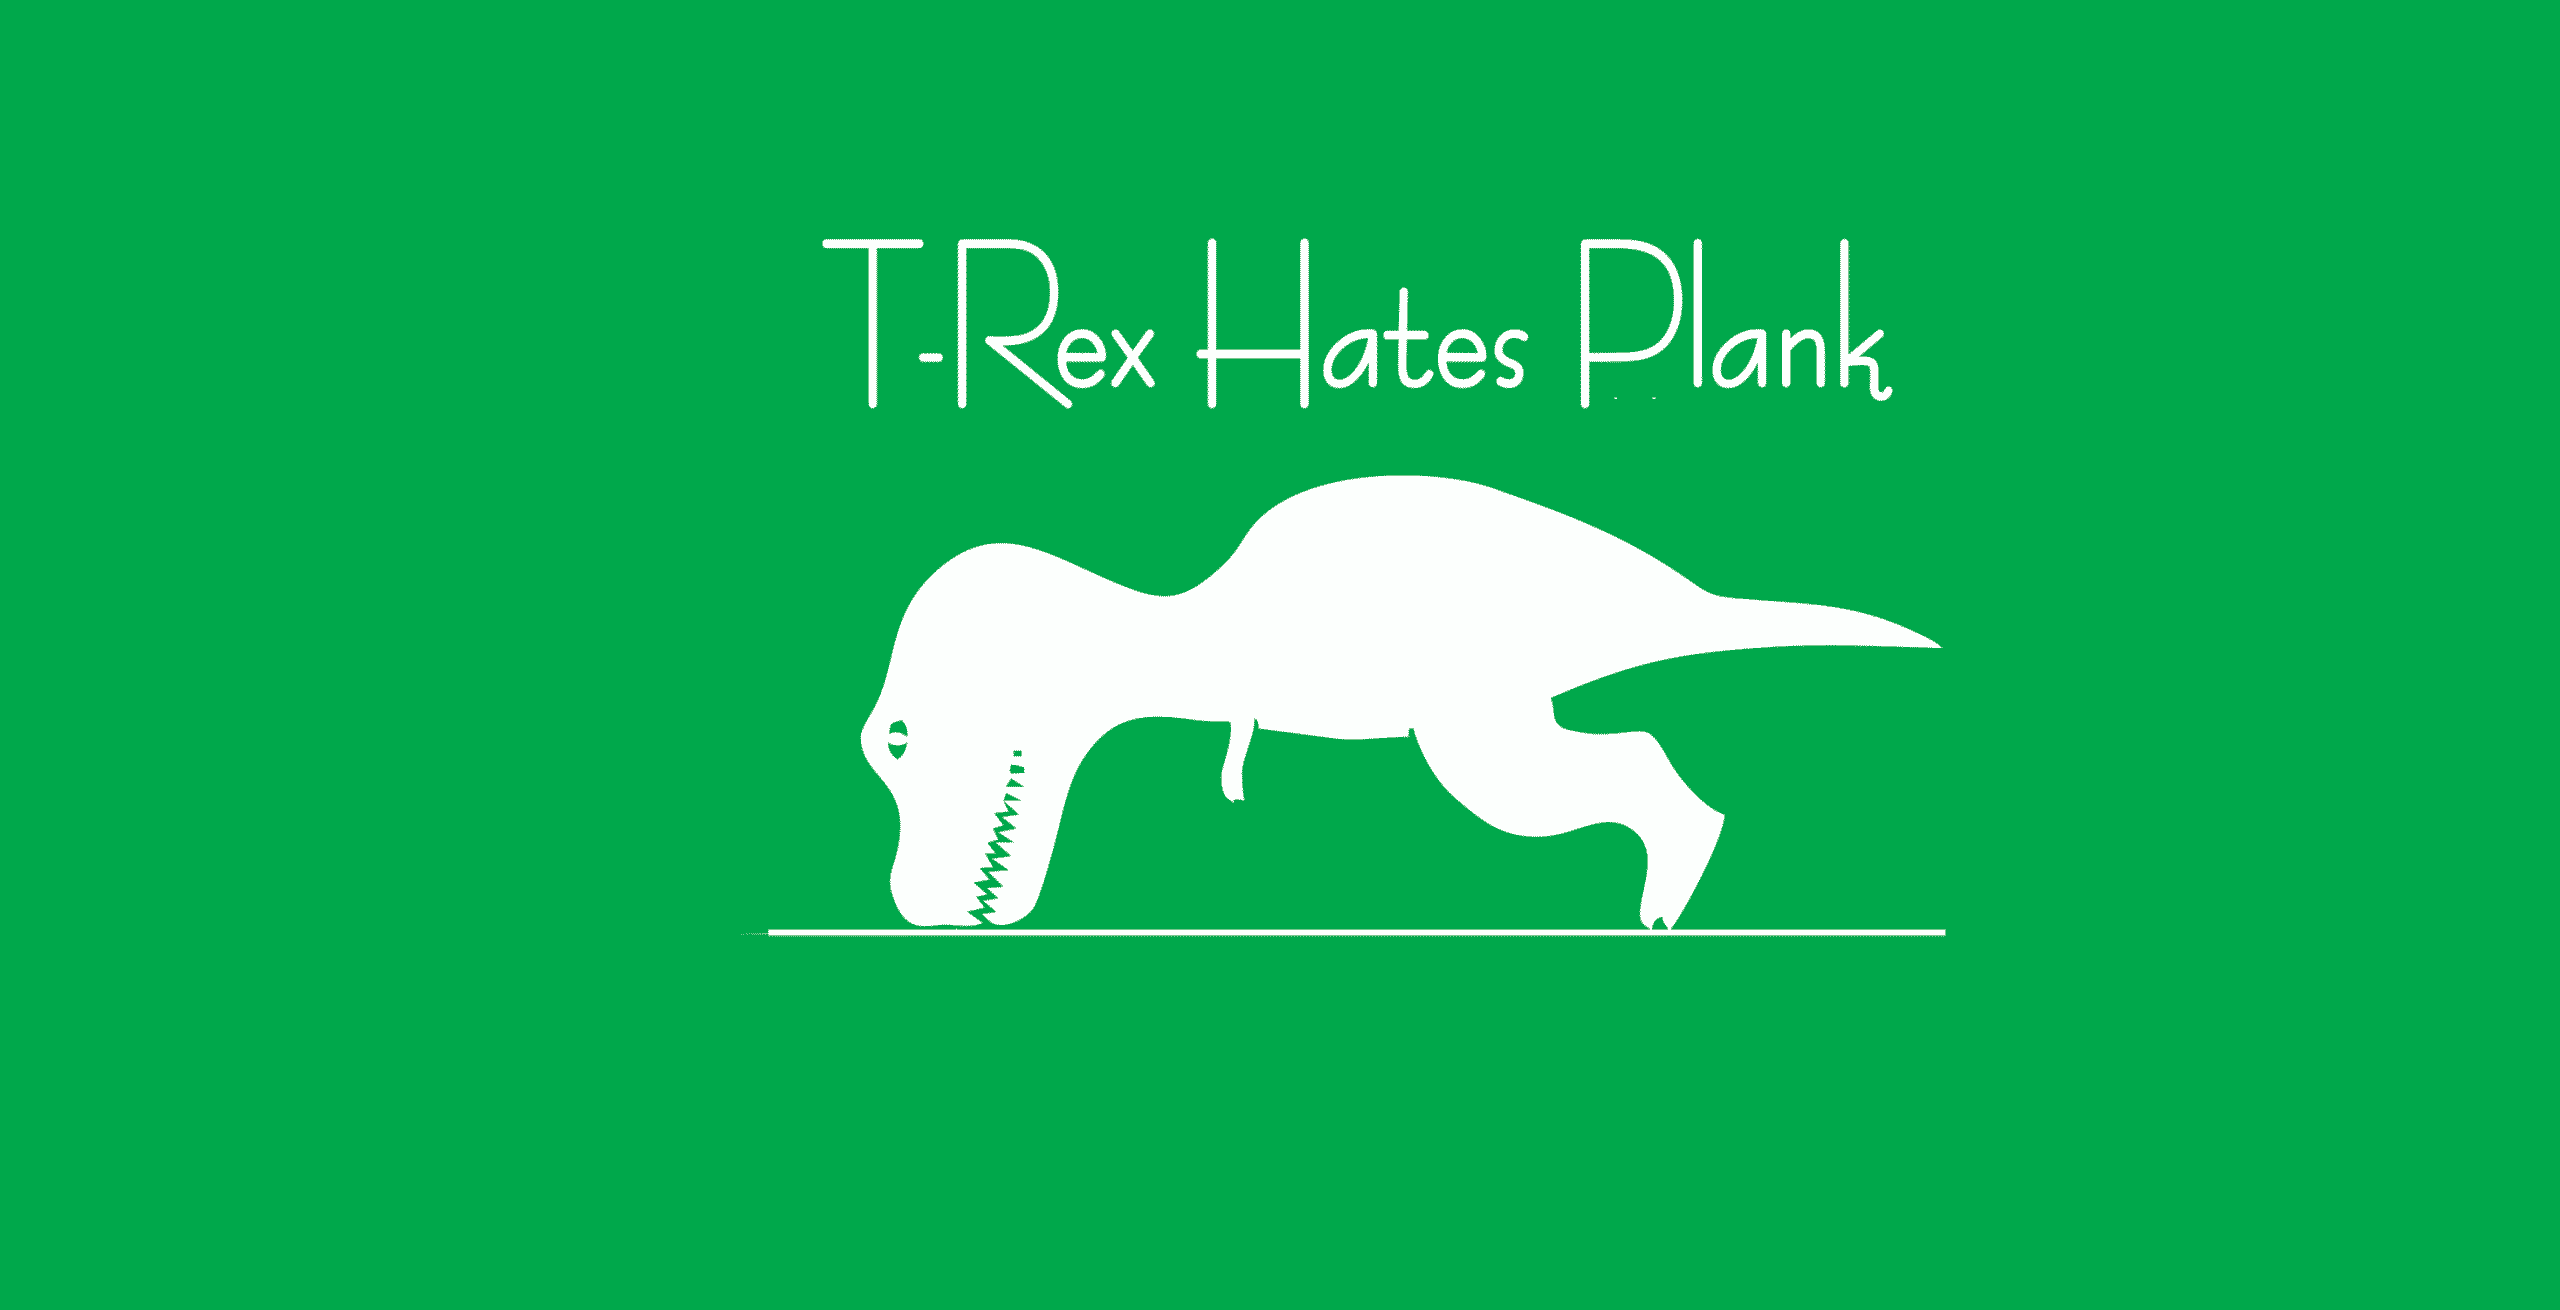 You need to correct some of those planks